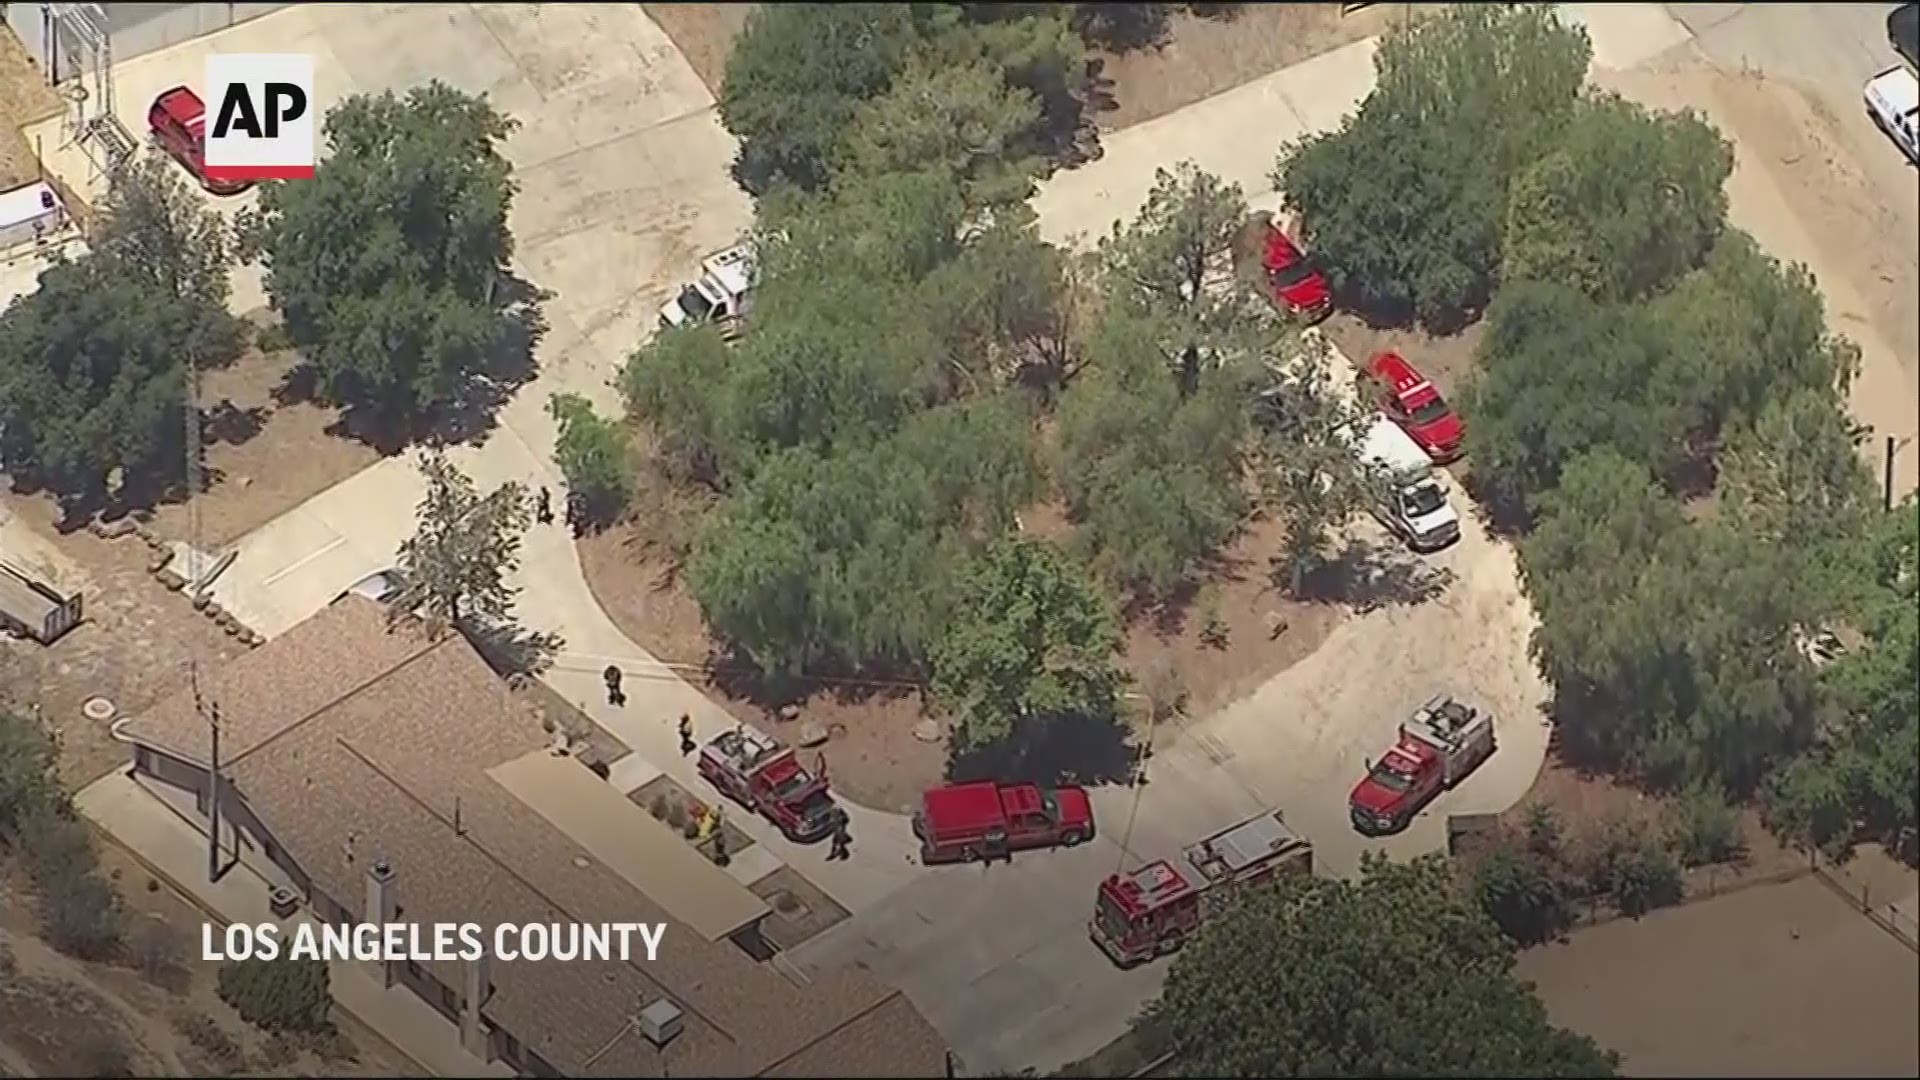 Authorities say a firefighter has killed a co-worker and wounded another at their small fire station in California’s second deadly workplace shooting this week.